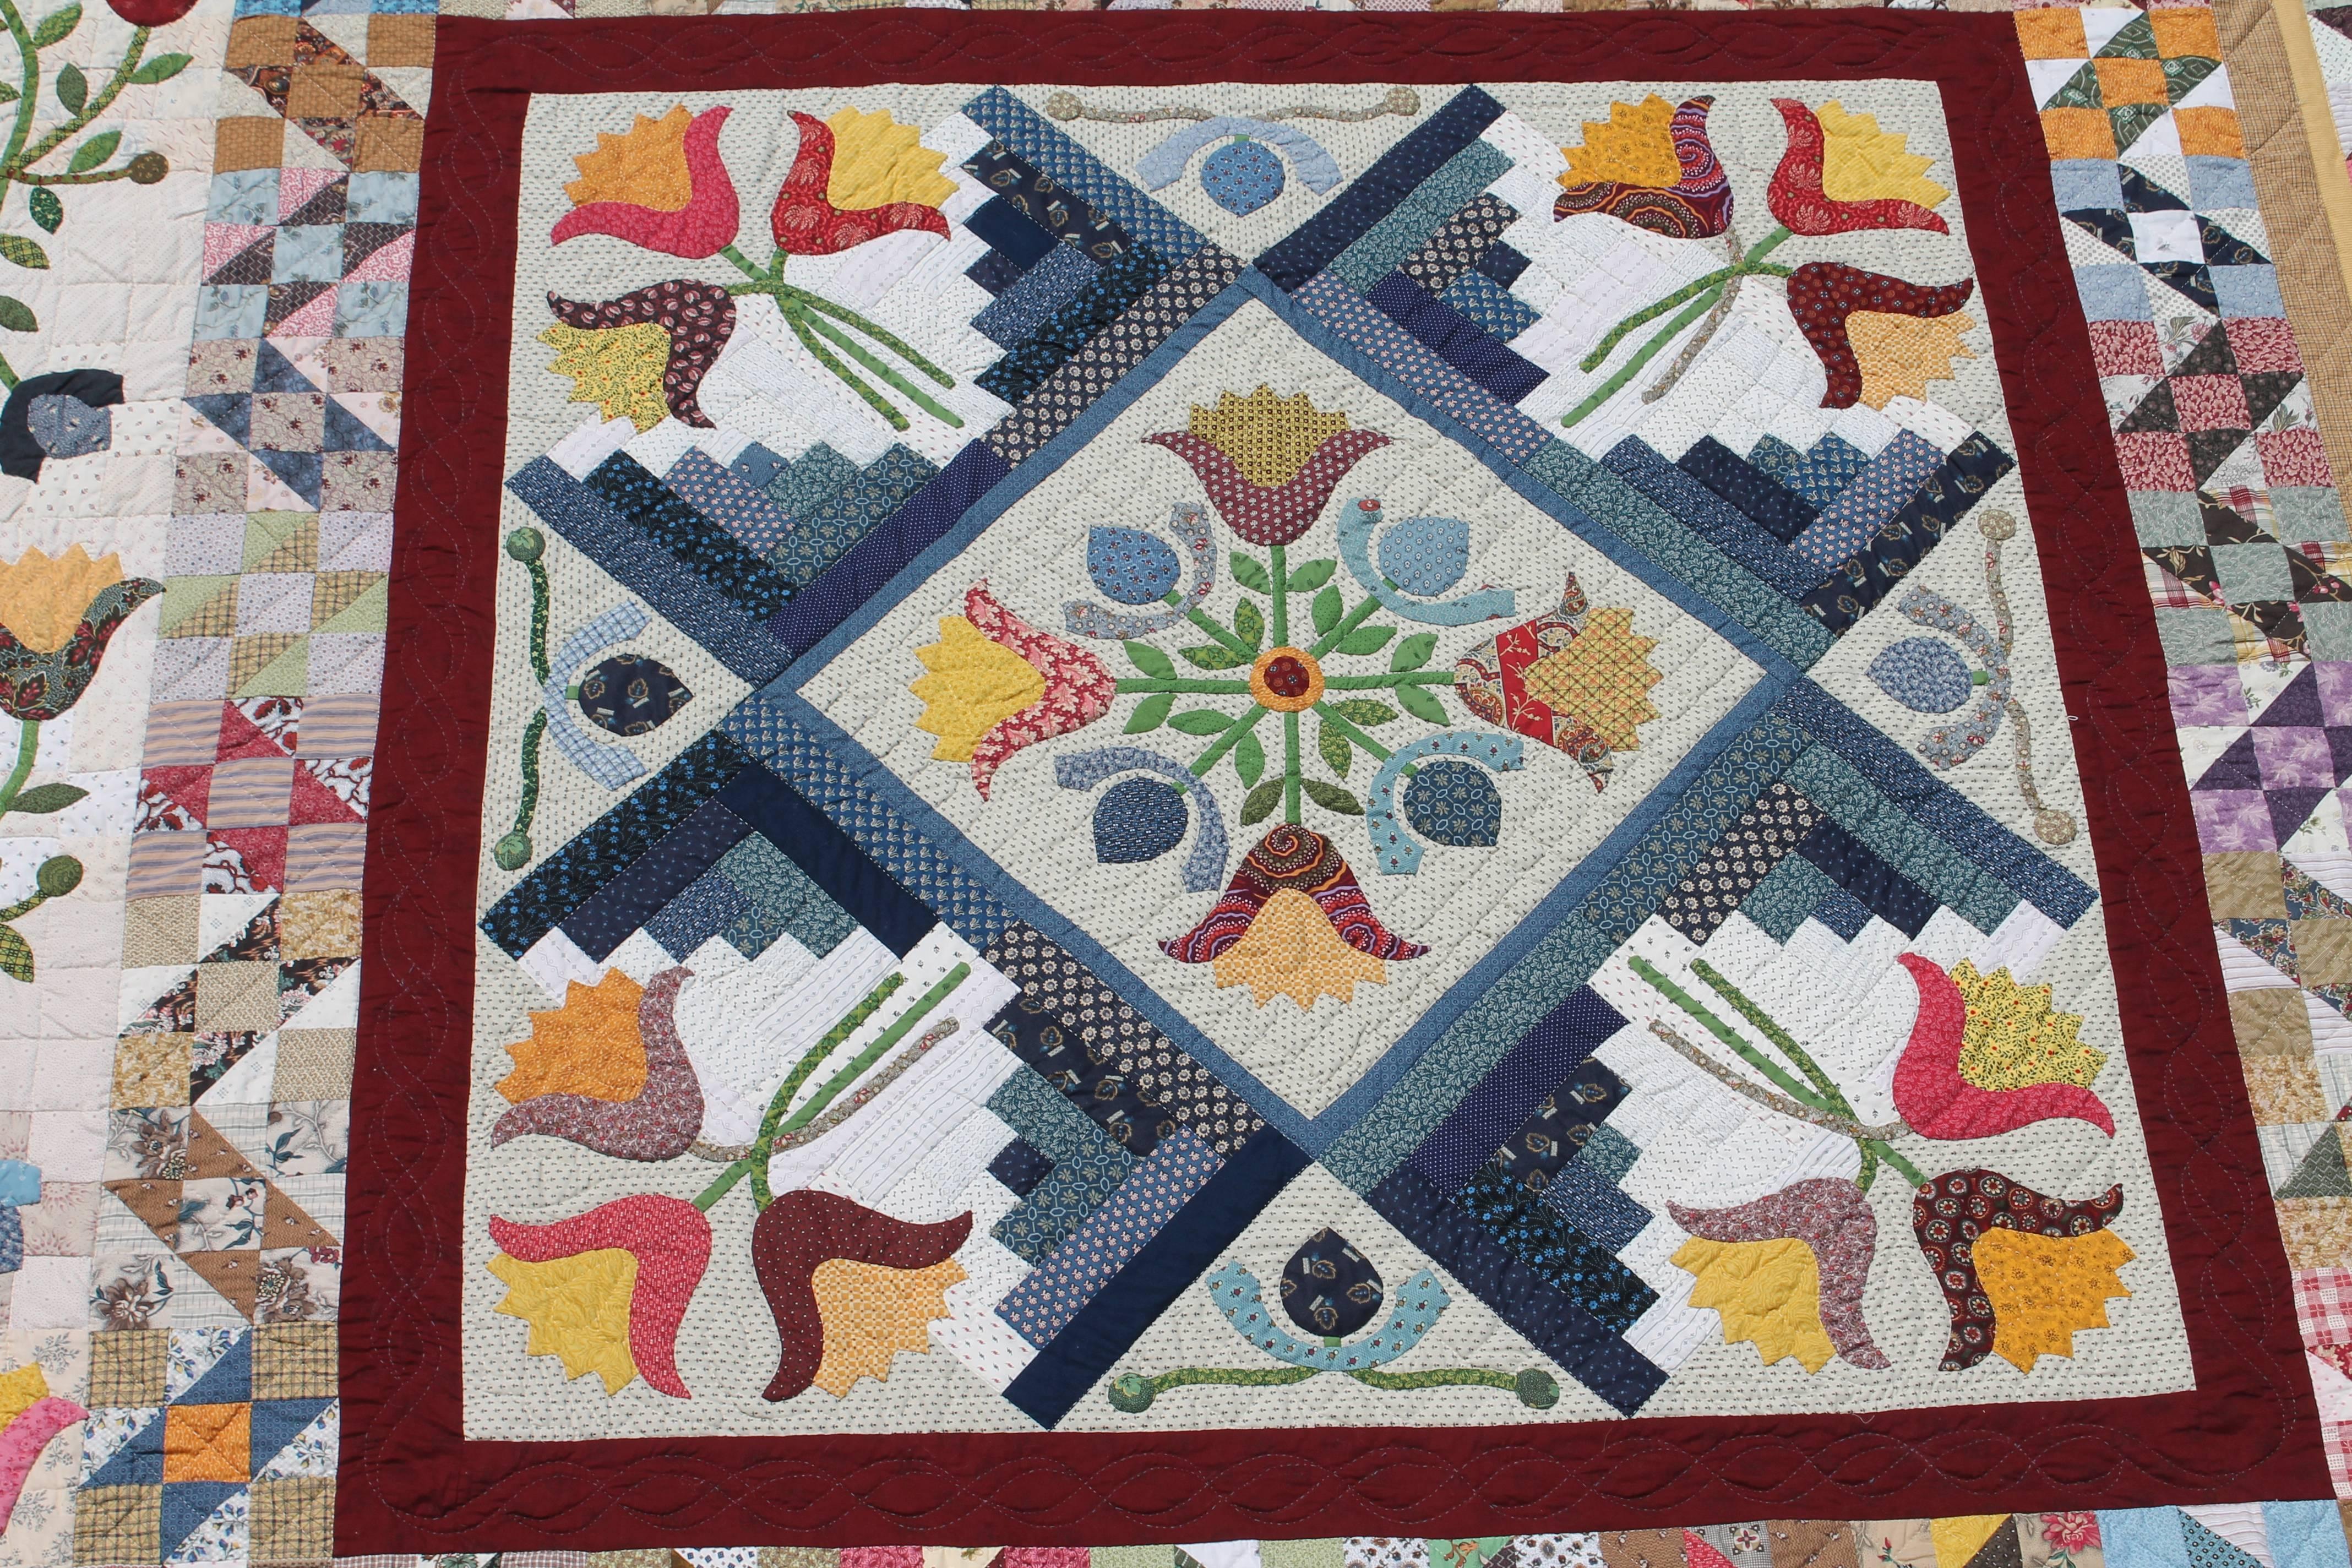 This later version of a very early 19th century applique and patchwork quilt is in wonderful condition and would fit a queen or king bed. This quilter was the very best at piecing and her artful quilting talent. It is signed on the reverse by the